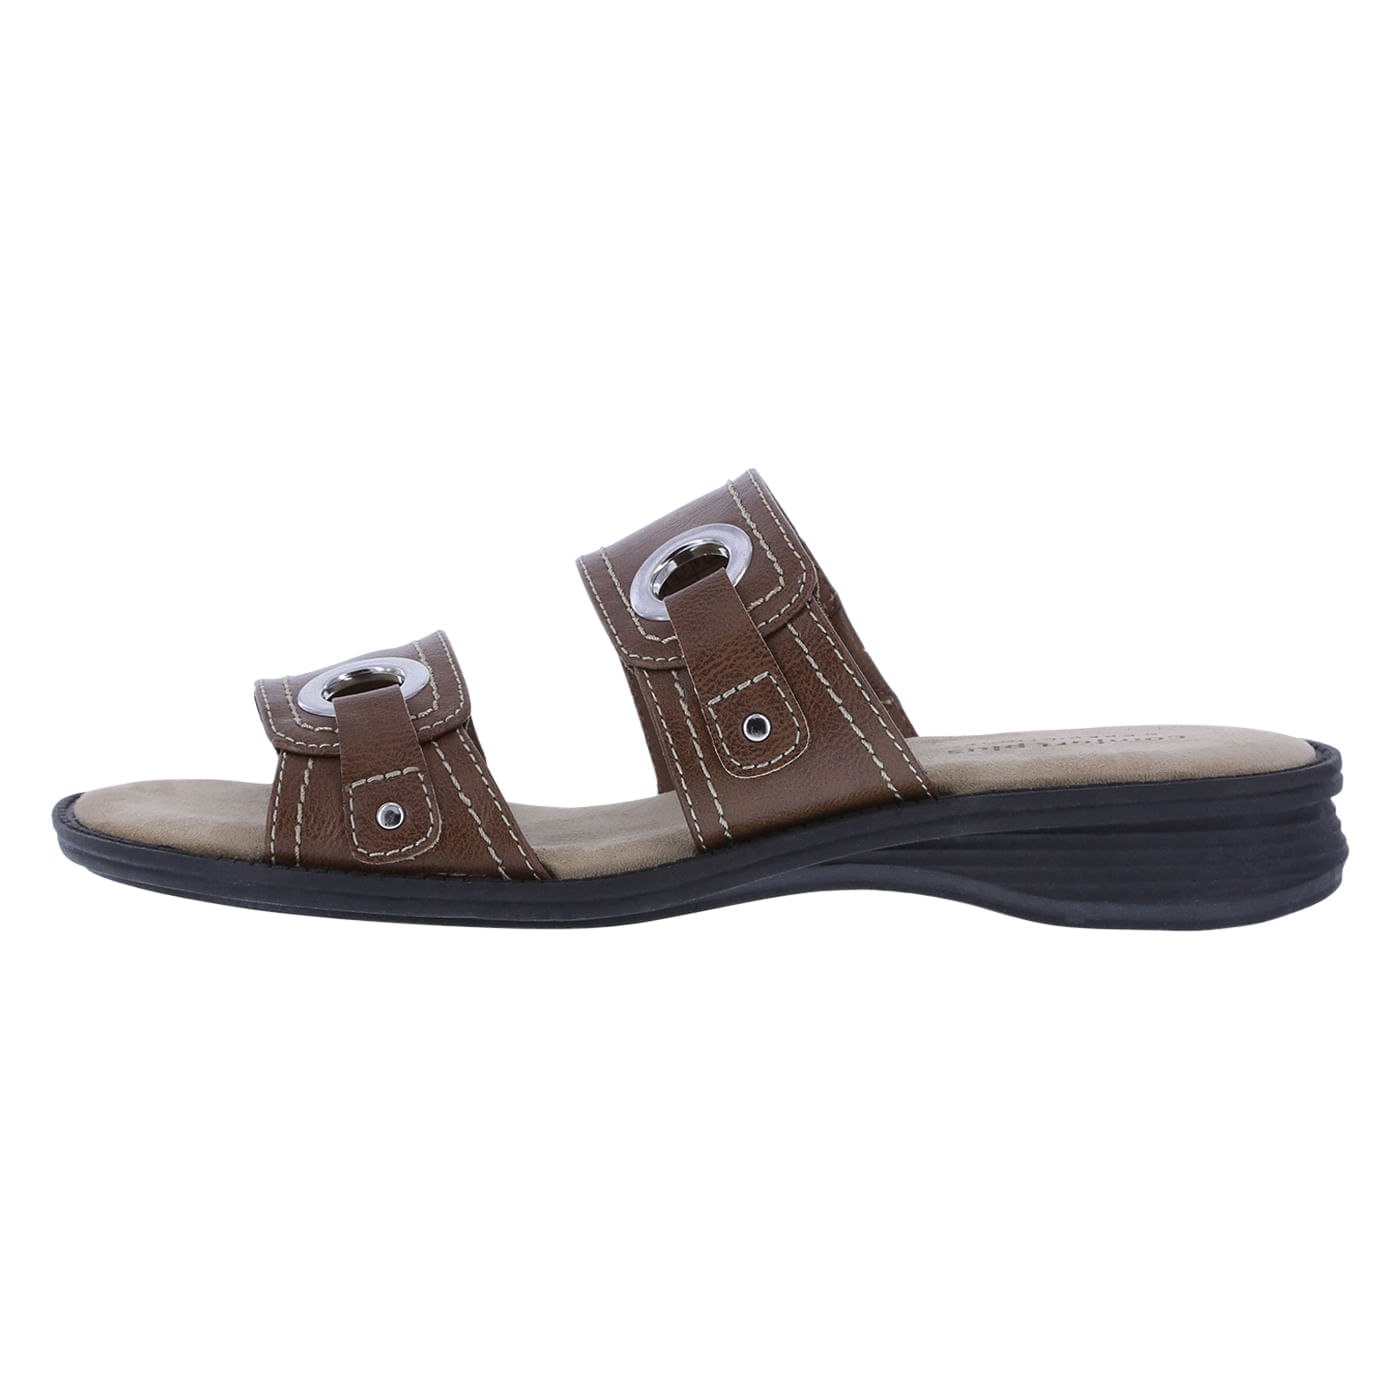 comfort plus wide fitting sandals